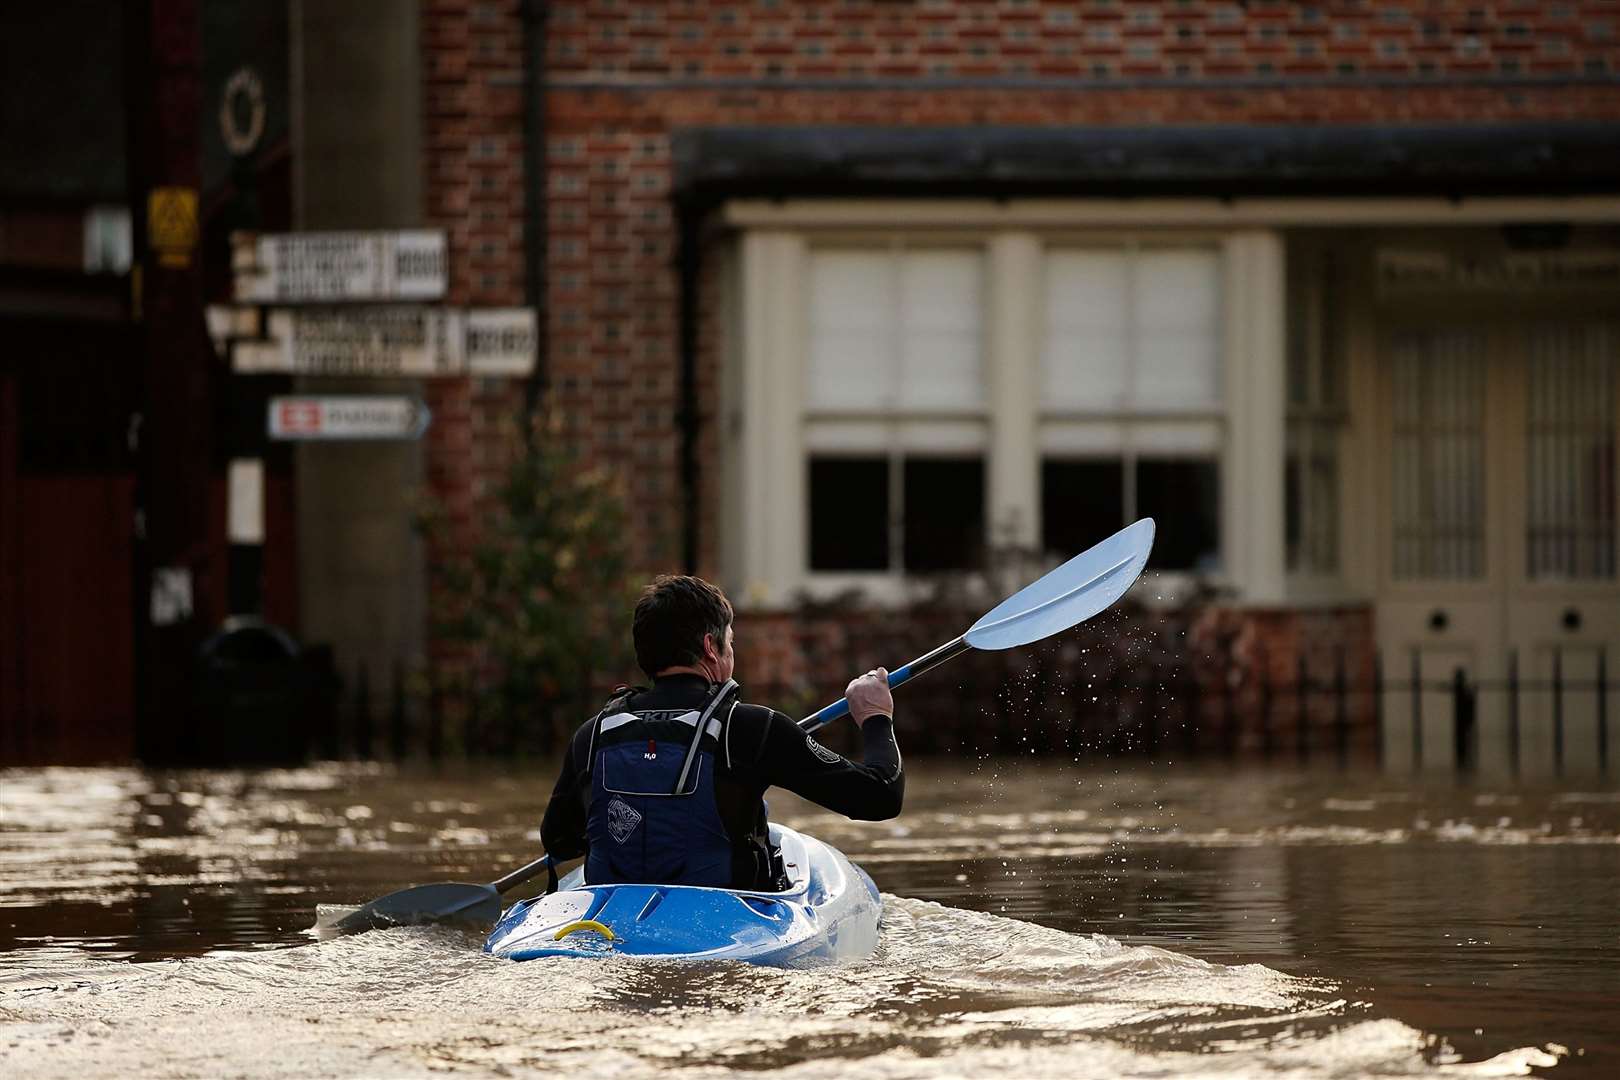 Flooding rocked Yalding in December 2013, along with other villages around Maidstone. Photo by Matthew Lloyd/Getty Images